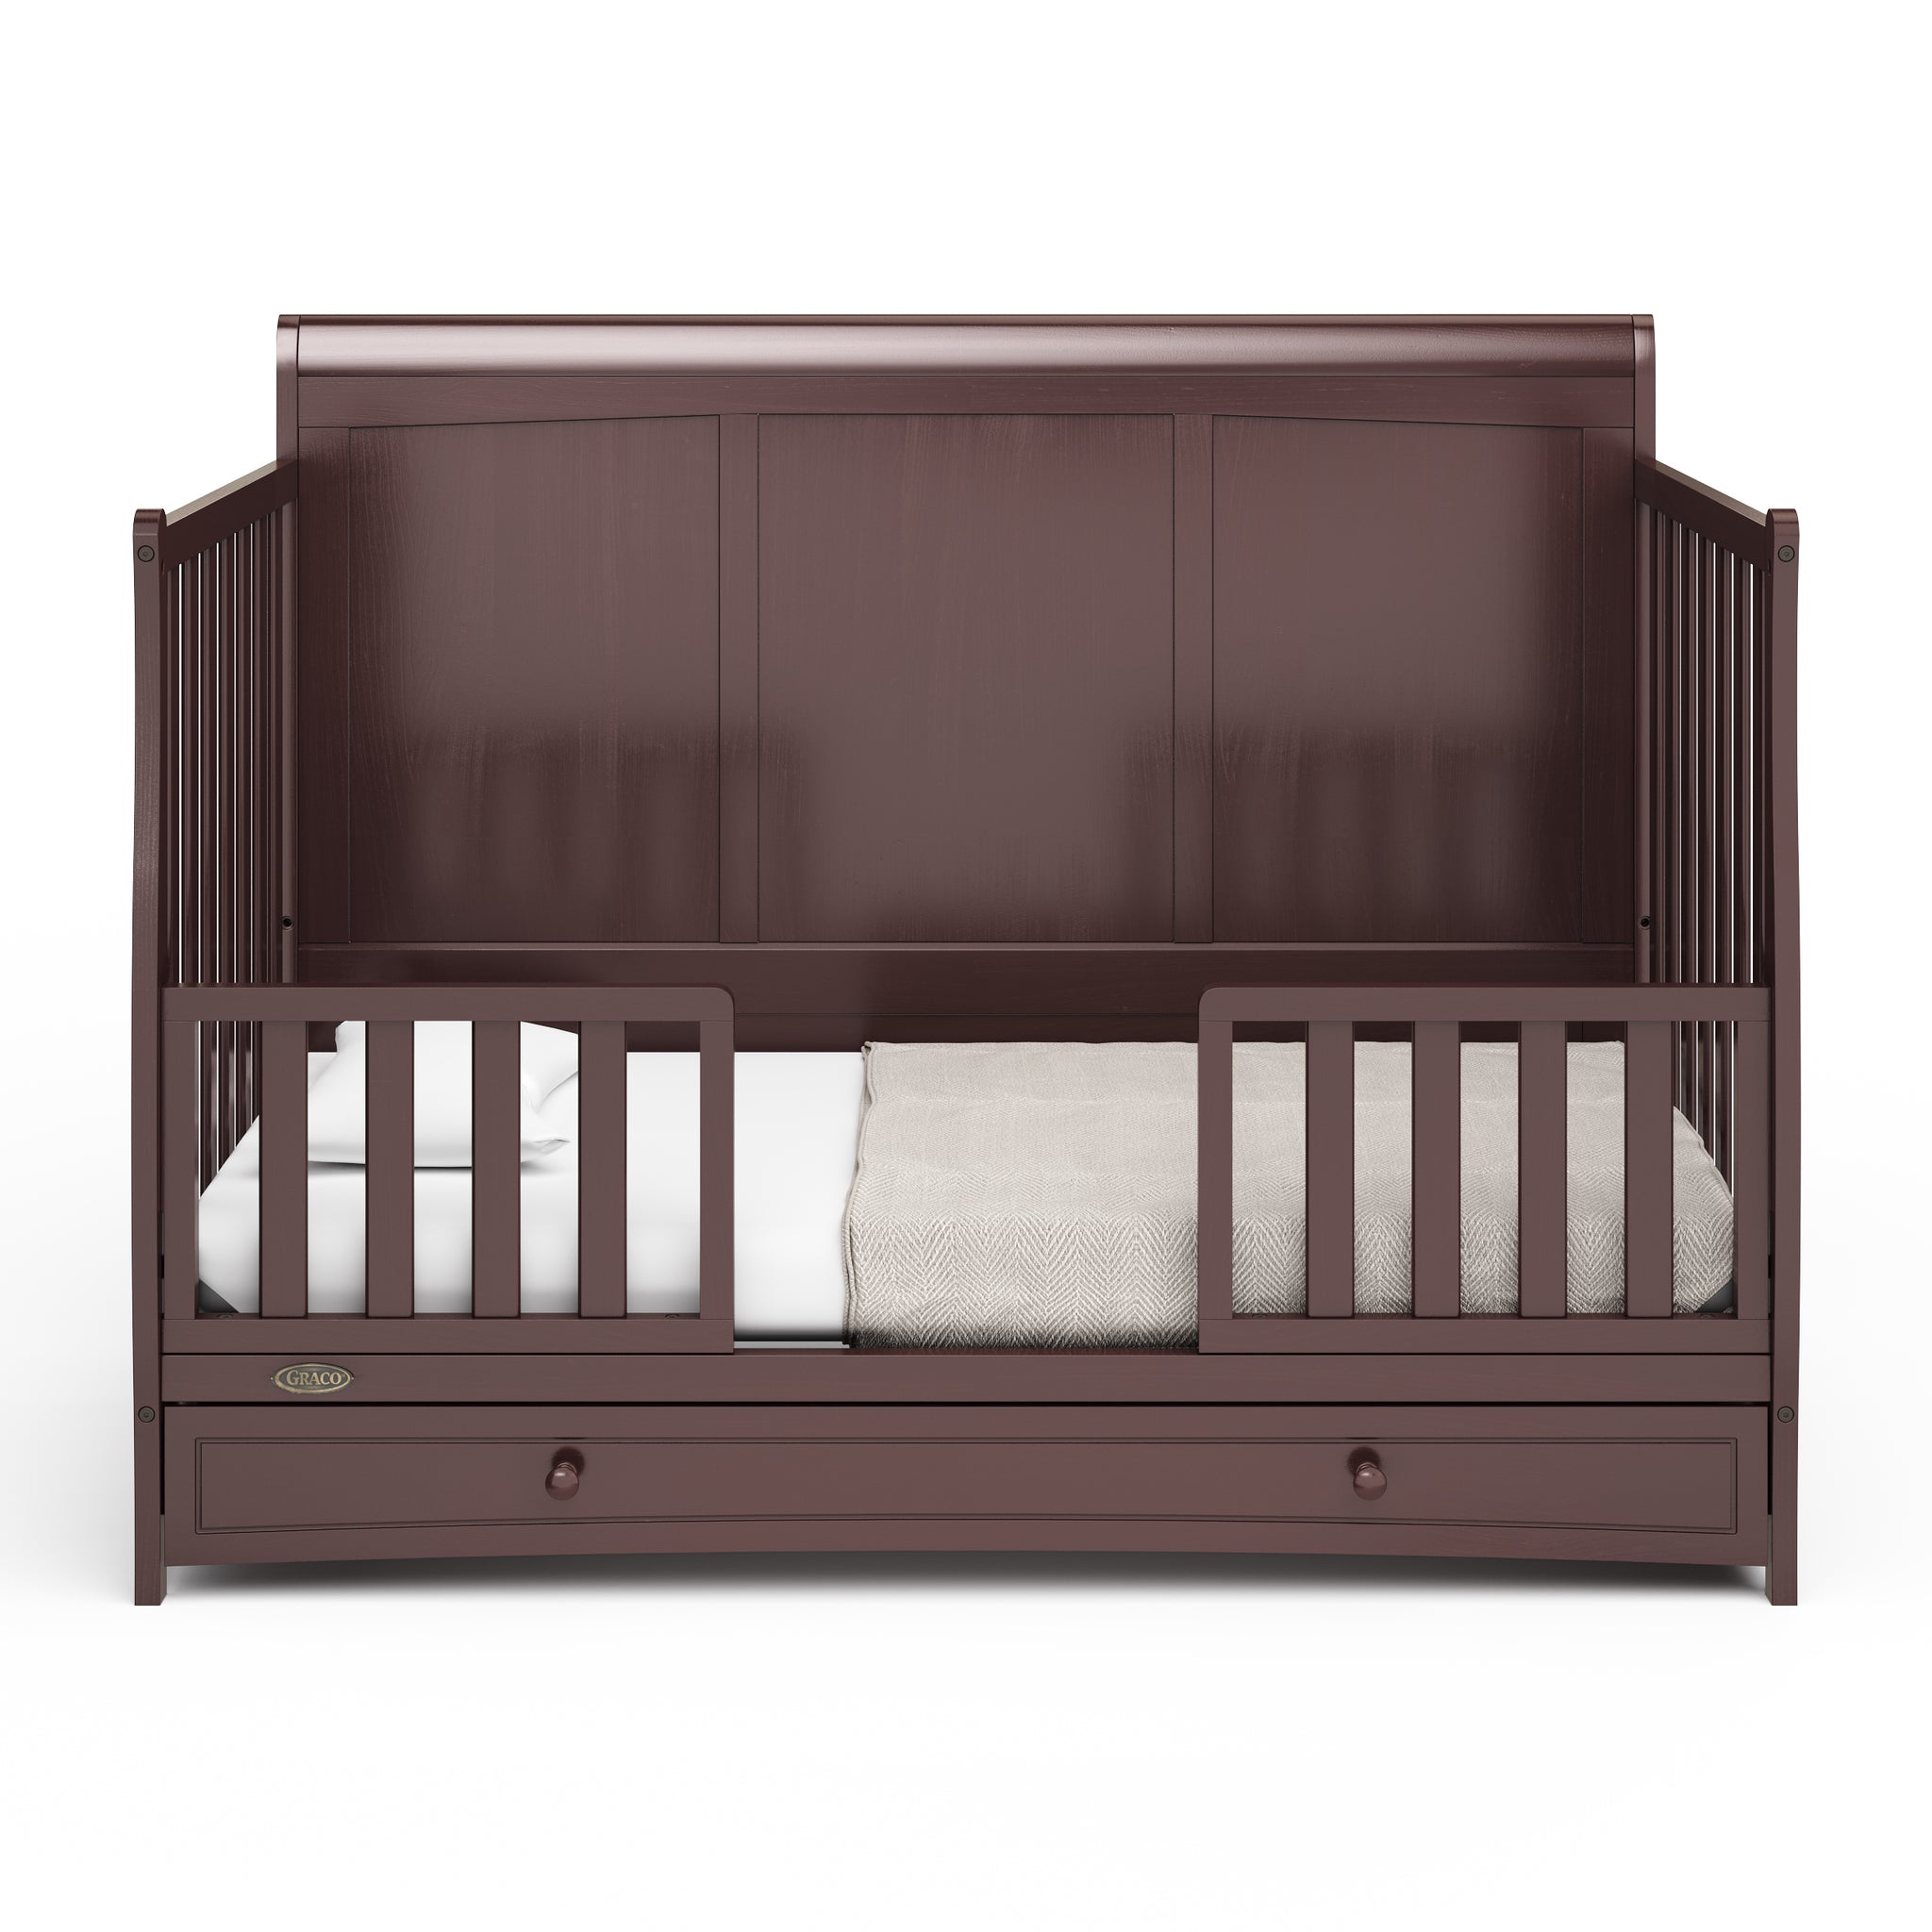 Espresso crib with drawer in toddler bed conversion with two safety guardrails